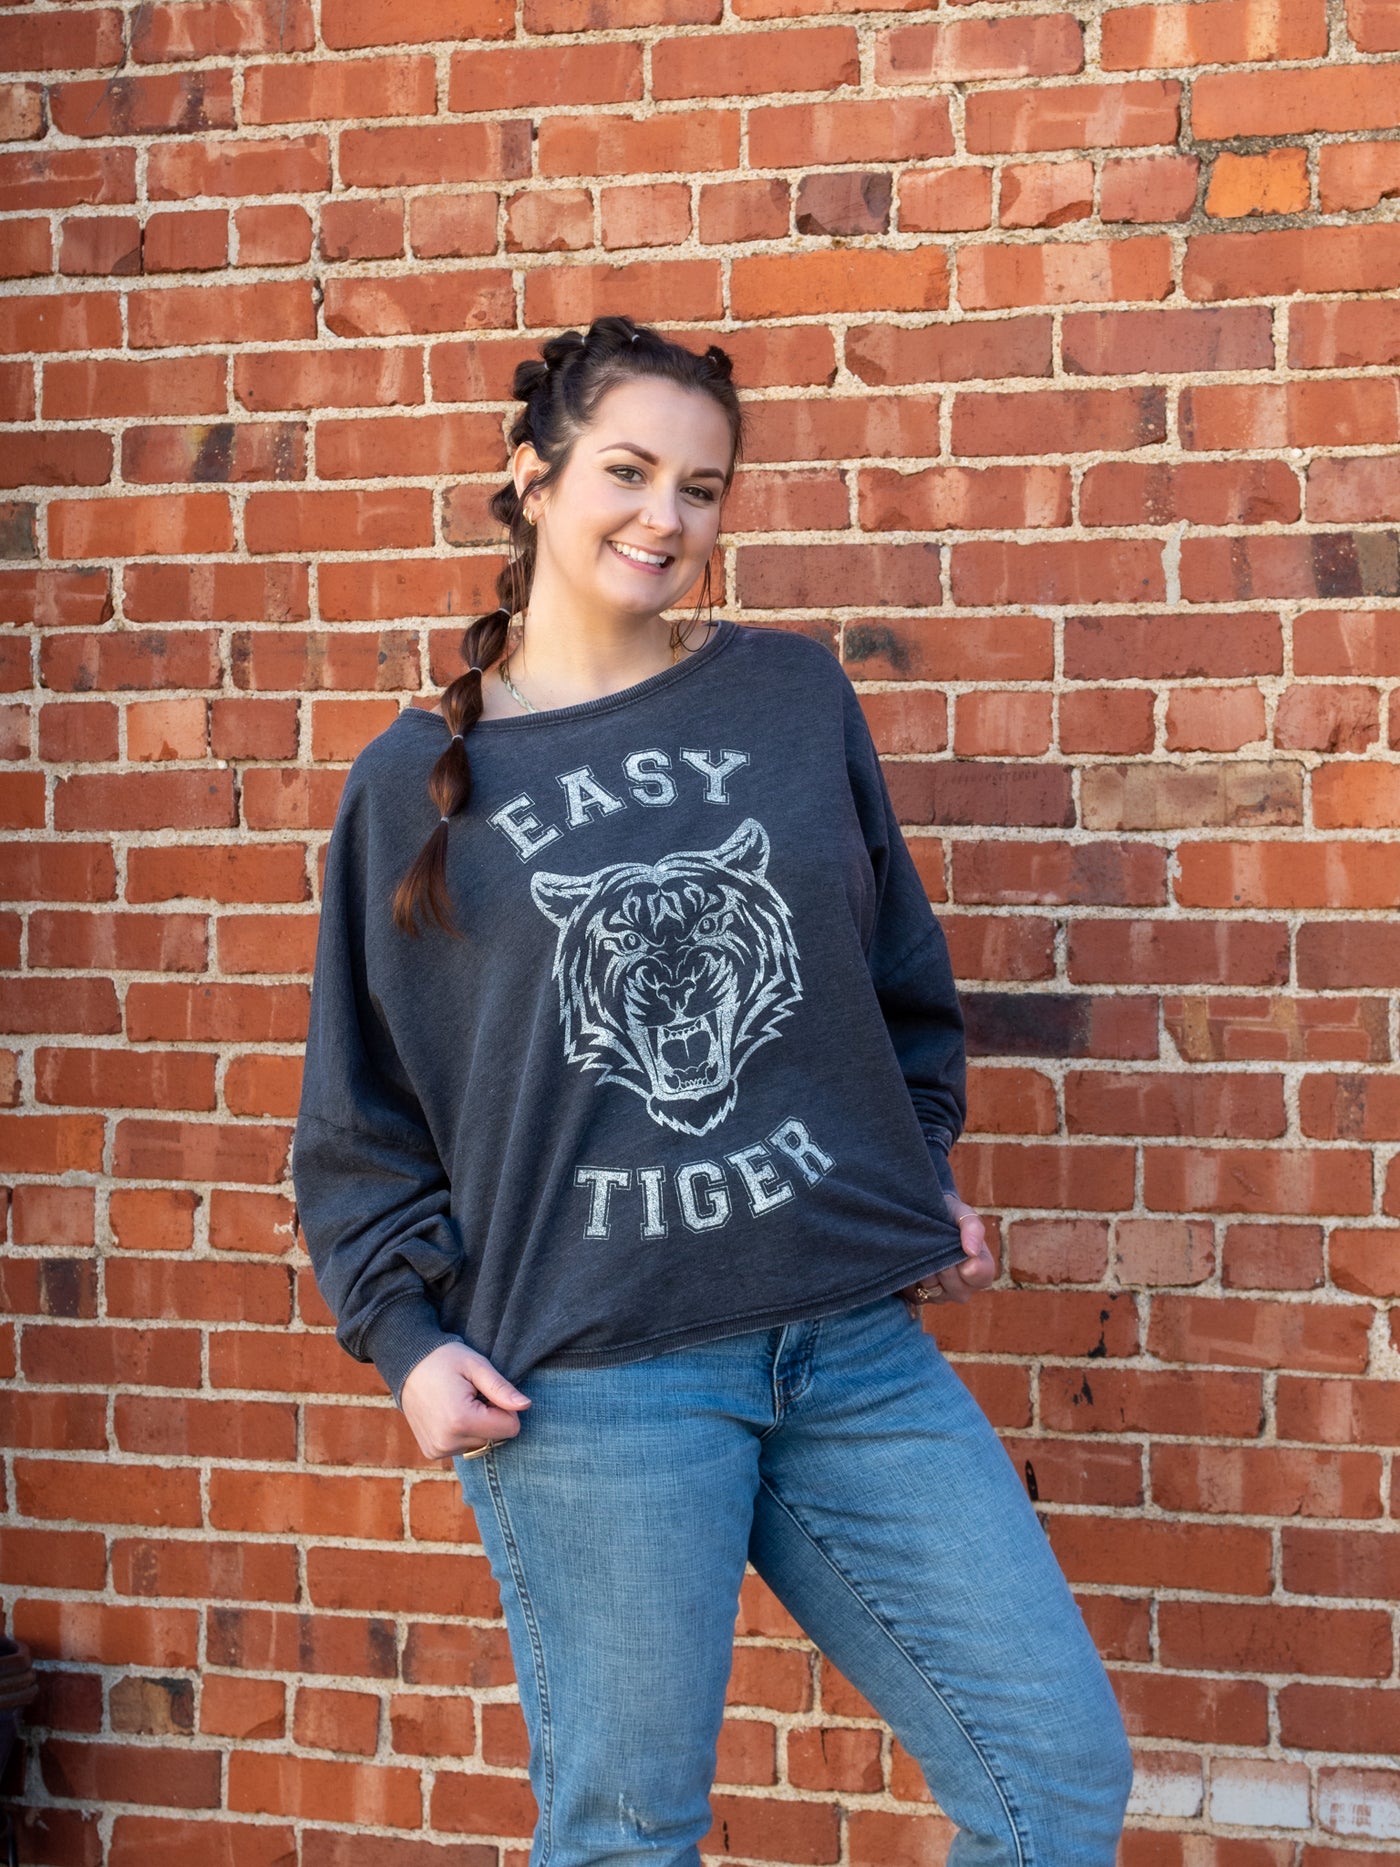 A model wearing a one size sweatshirt with an "Easy Tiger" graphic in a varsity font. It has a wide neck and high-low bottom. The model has it on with denim jeans.